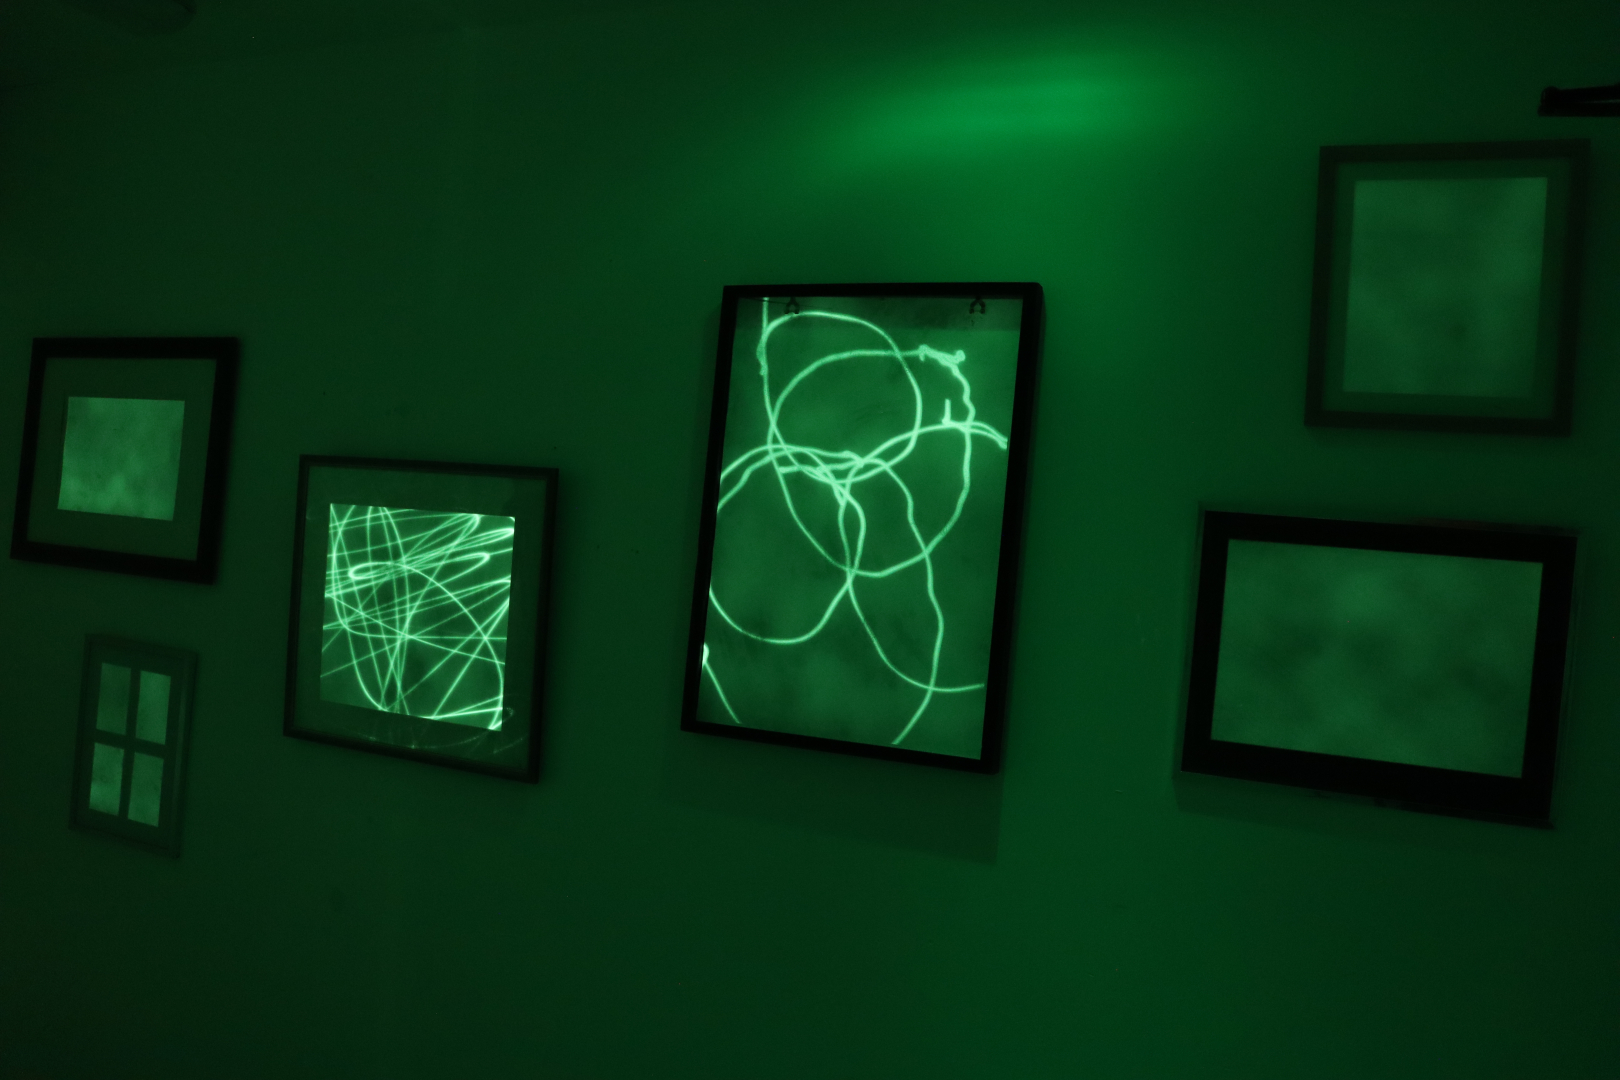 Glow in the dark objects in a dark room. Lights and people represented on objects.